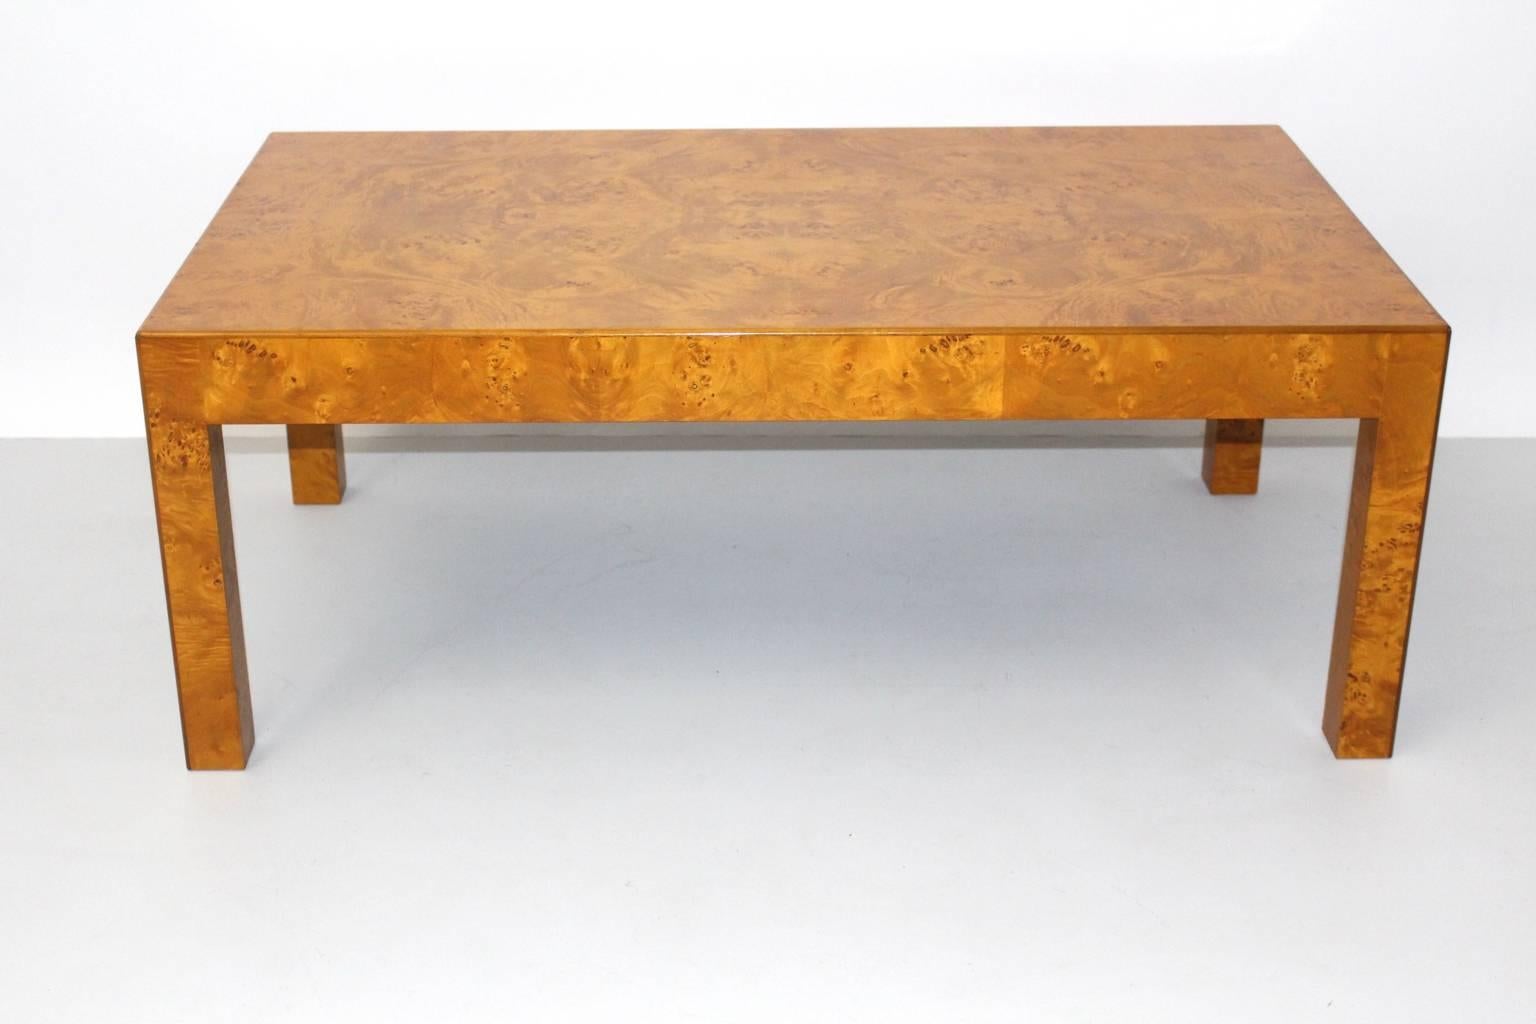 A modernist ash vintage coffee table, which features simple and great design features in the style of Milo Baughman.

Also the coffee table is veneered with ash wood root and shows a very good vintage condition with signs of age and use.
All